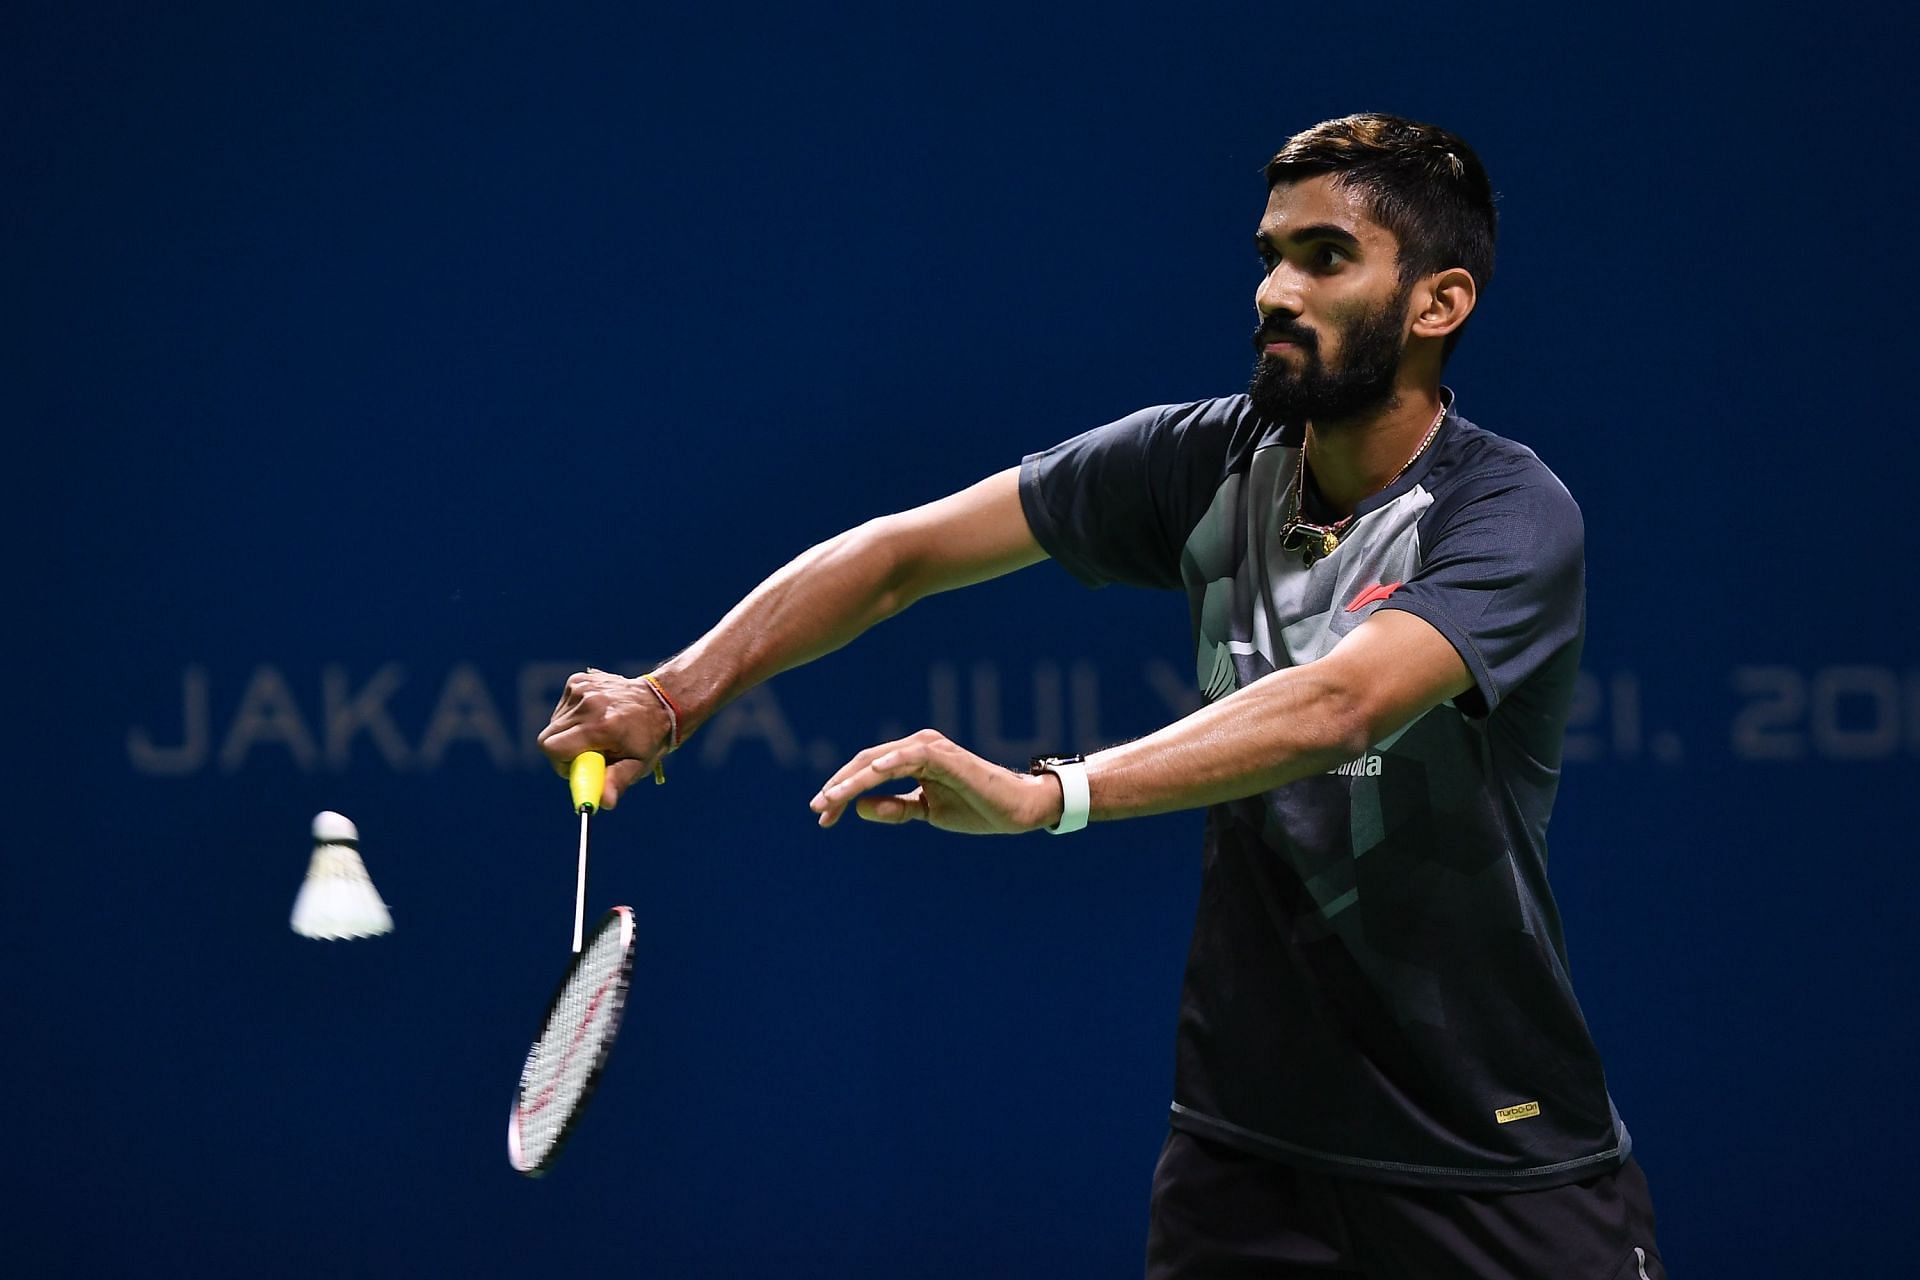 Kidambi Srikanth in action at the Indonesia Open (Image courtesy: Getty Images)